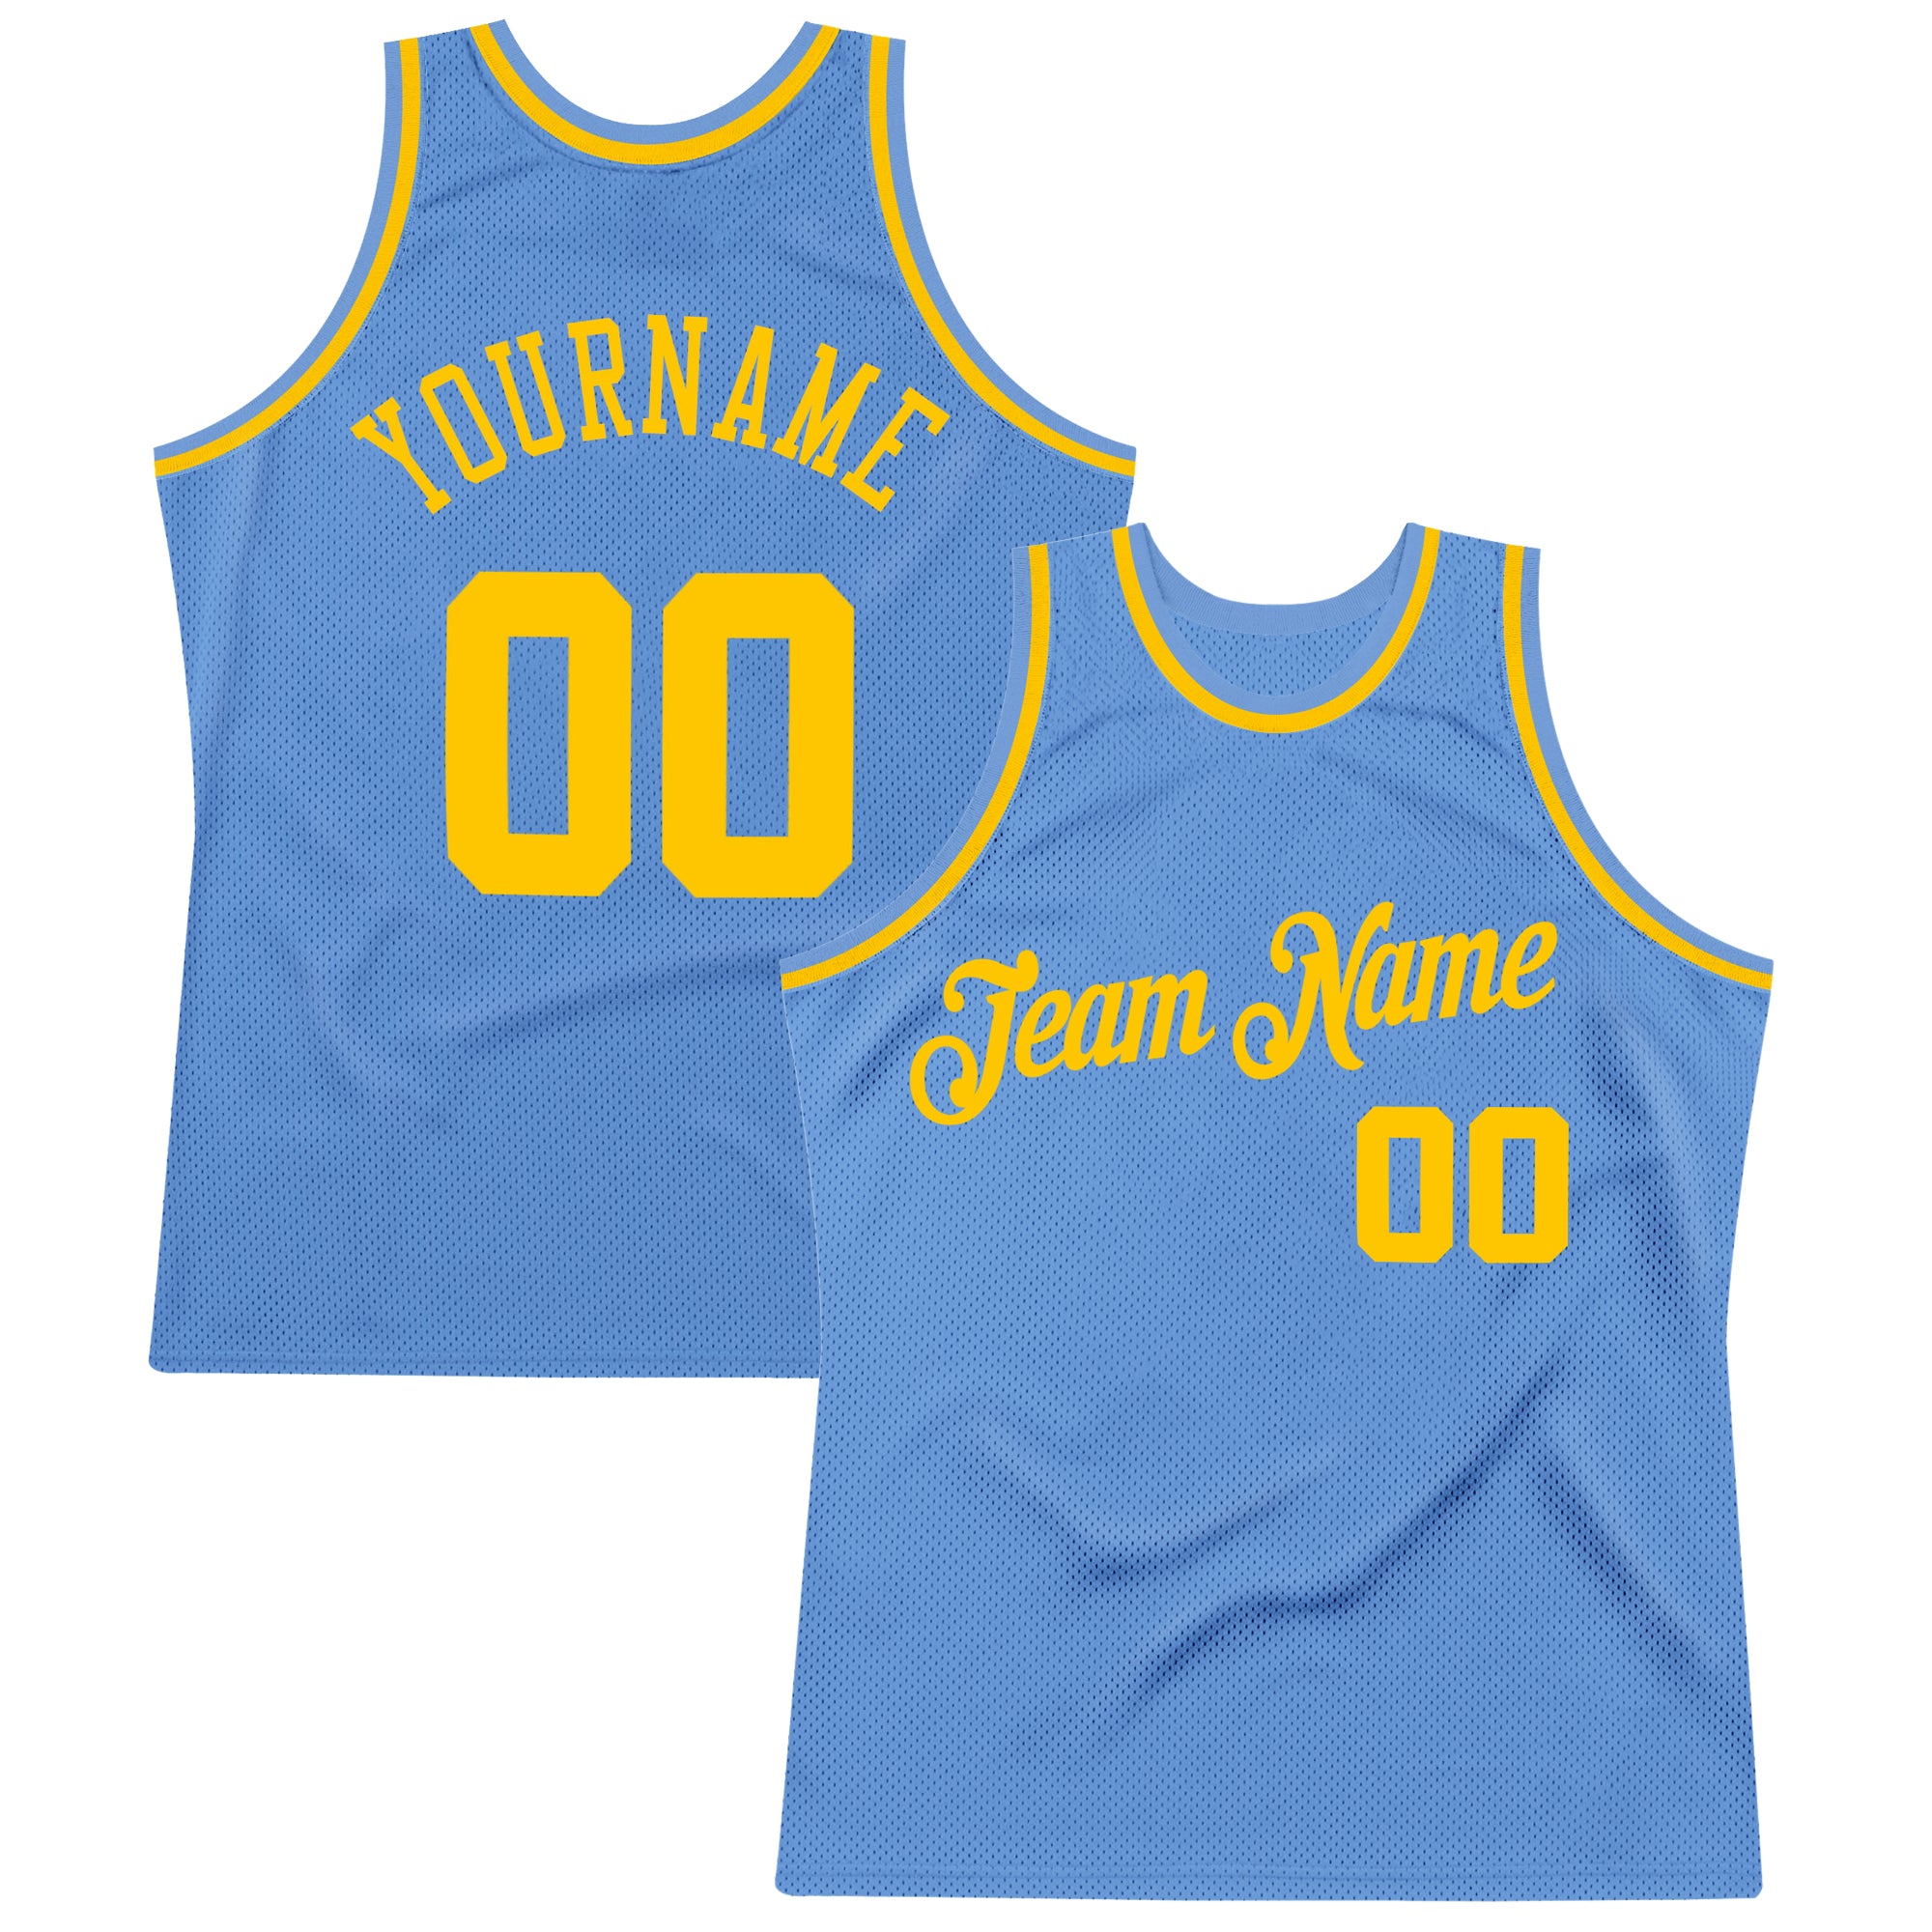 CUSTOMIZED CHCAGO 21 BASKETBALL JERSEY DESIGN WITH FREE NAME & NUMBER FULL  SUBLIMATION HIGH QUALITY FABRICS